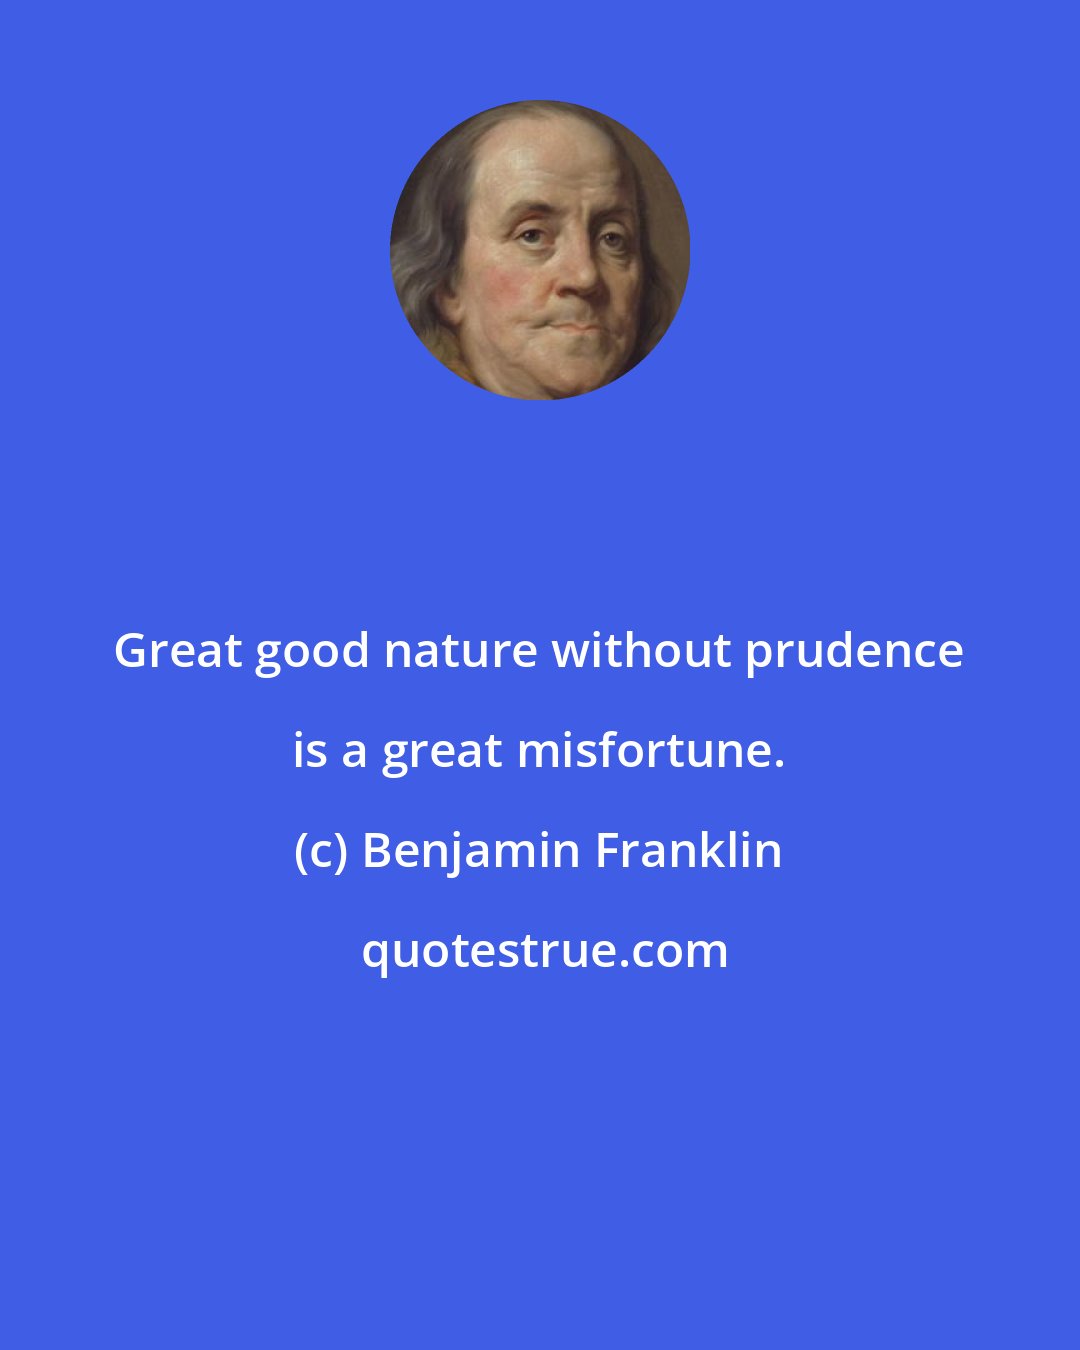 Benjamin Franklin: Great good nature without prudence is a great misfortune.